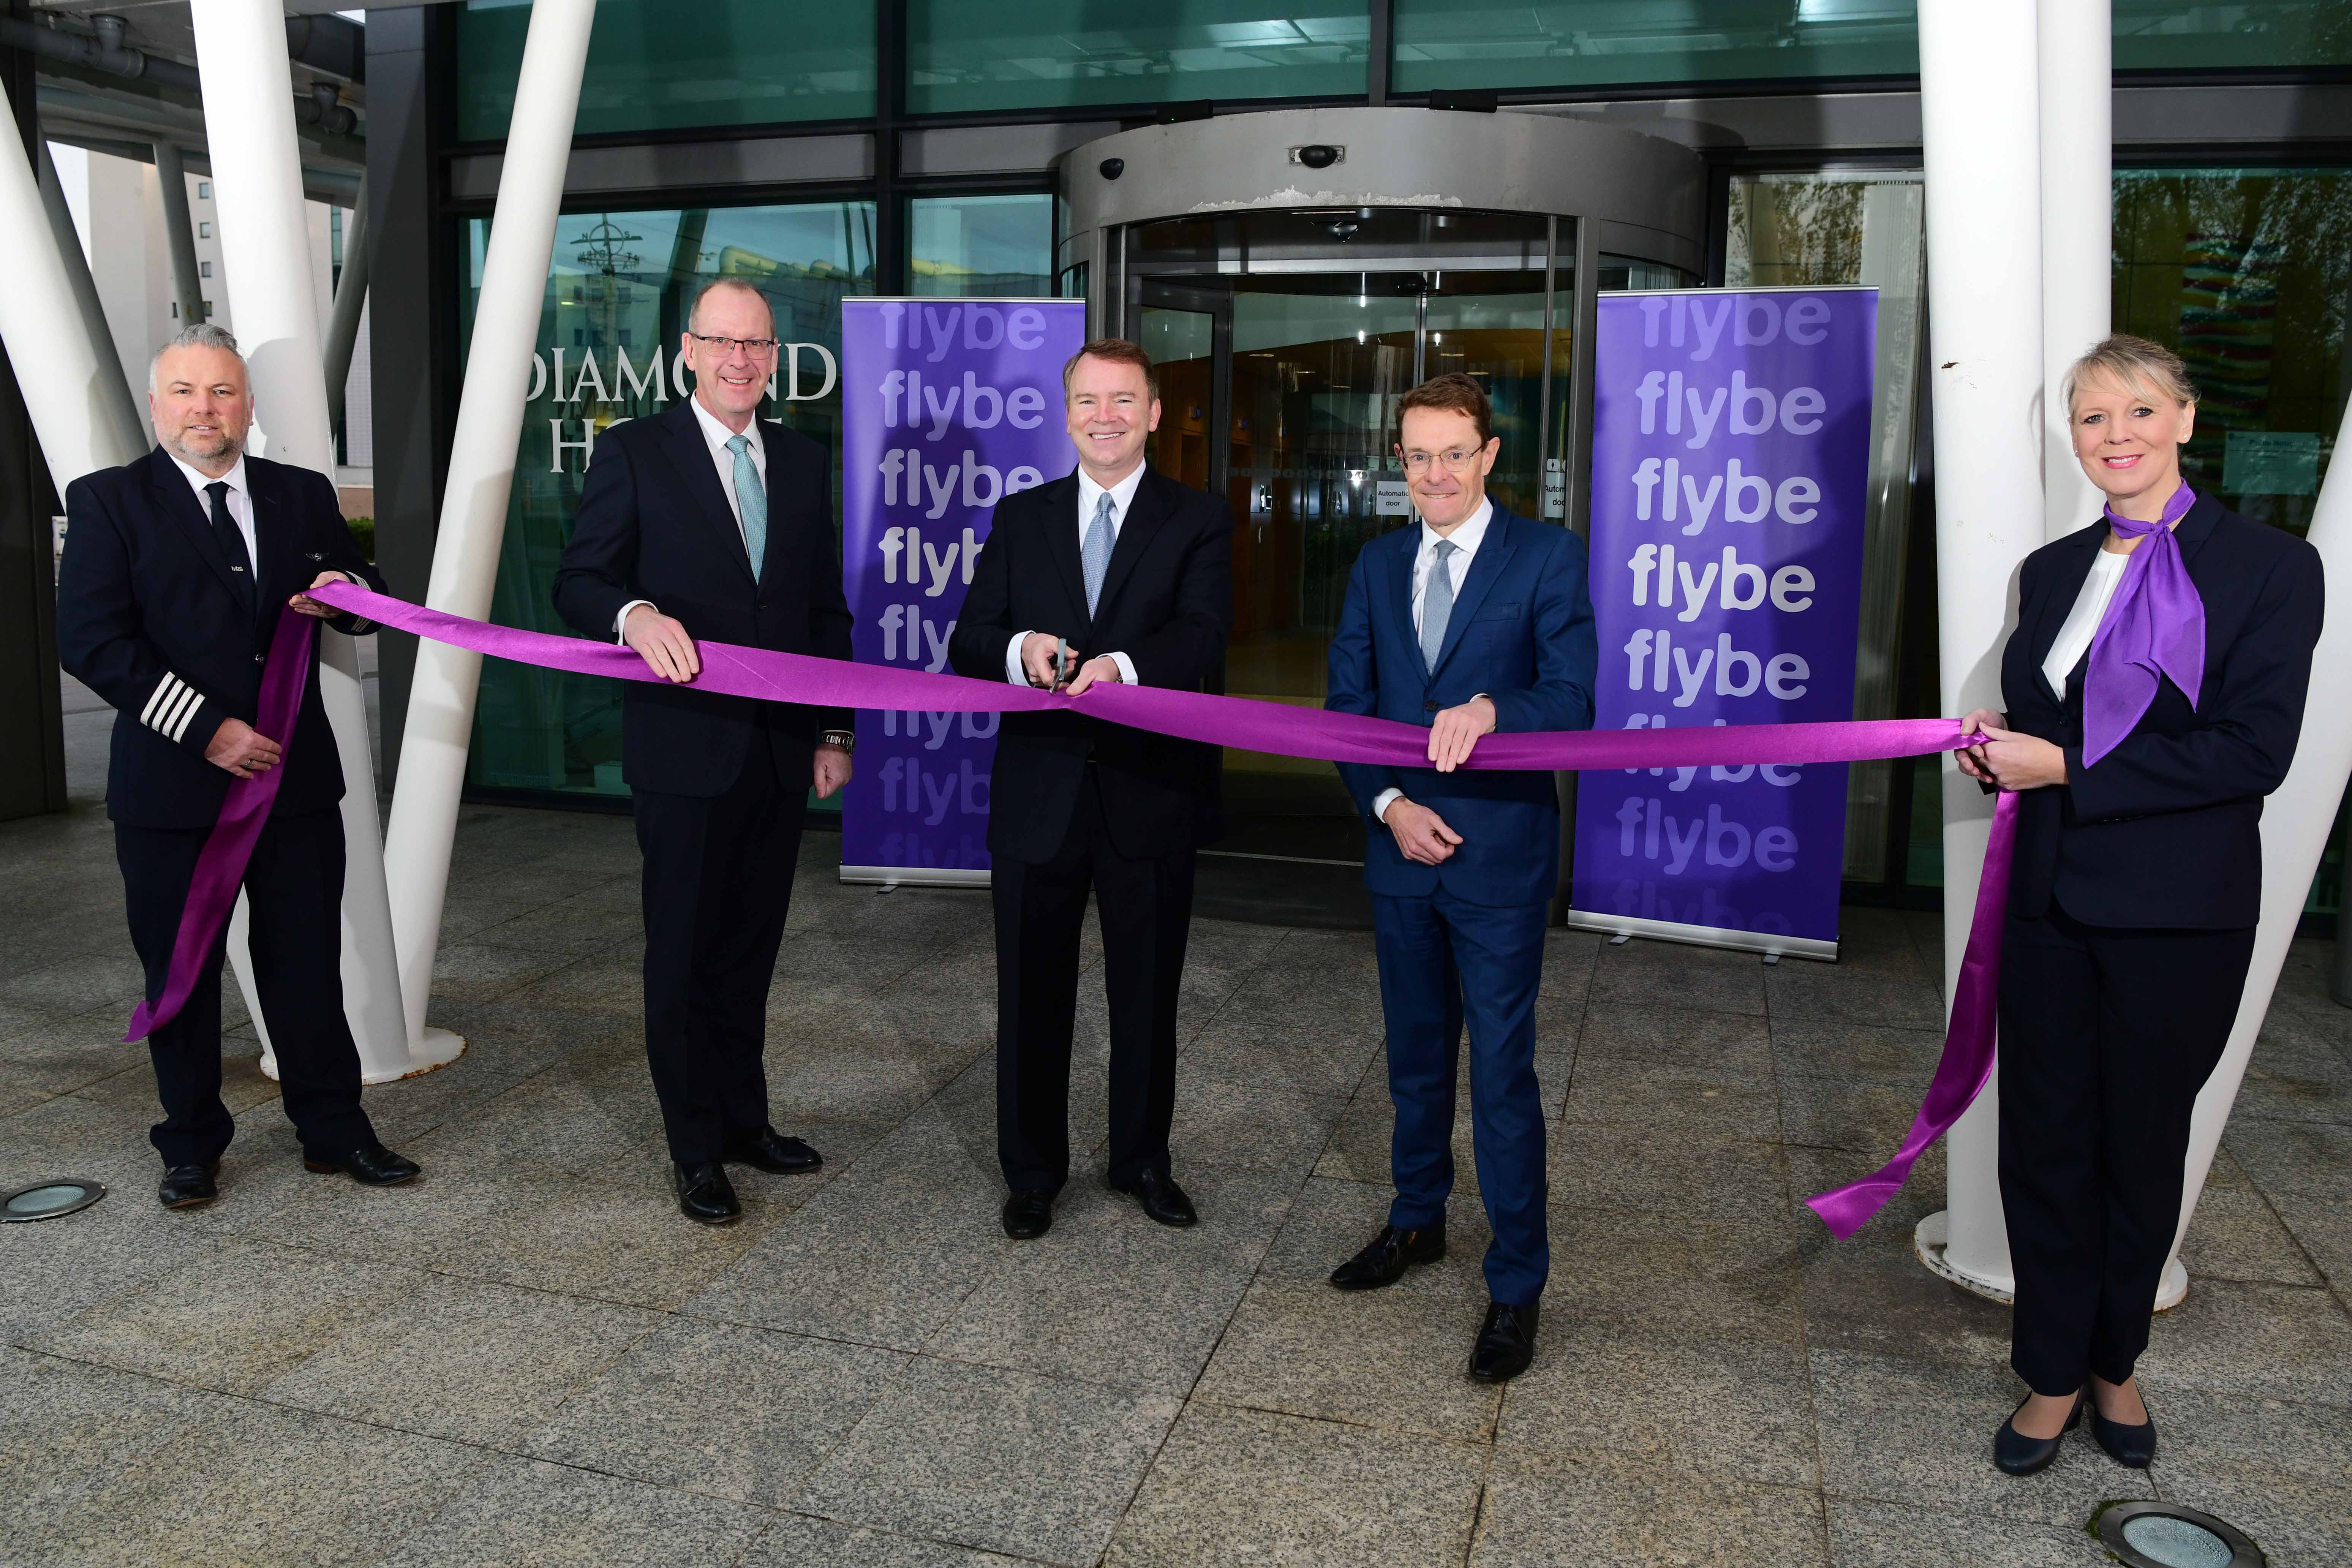 2021-11/1-mark-firth-flybe-nick-barton-birmingham-airport-david-pfilger-ceo-of-flybe-andy-street-mayor-of-west-midlands-and-c